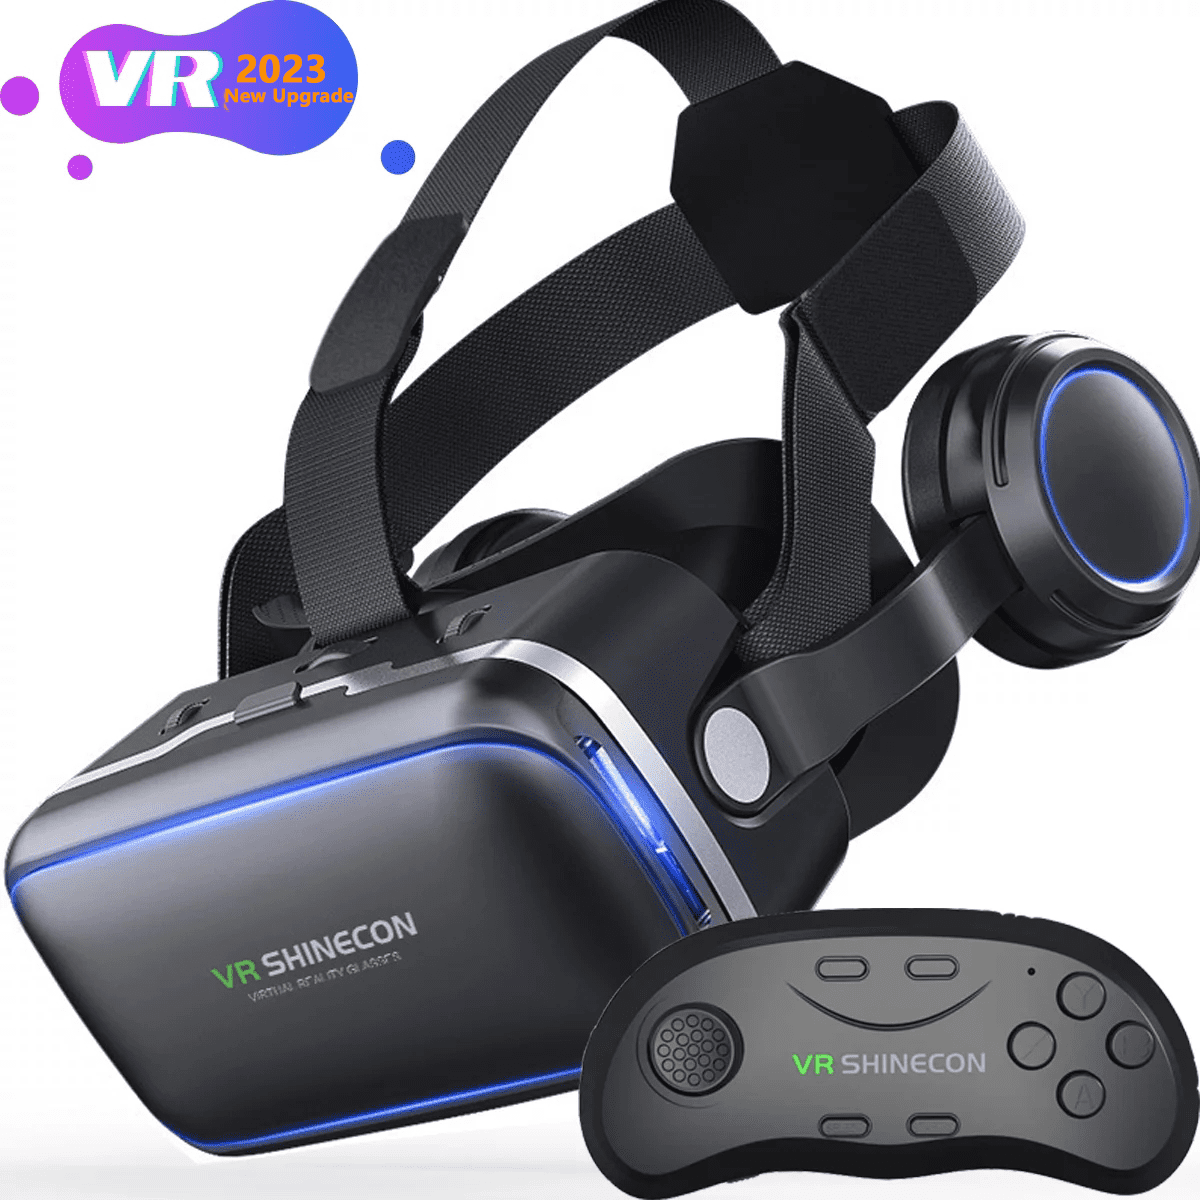 Upgraded 2023 VR Glasses with Remote Controller, 3D Glasses Virtual Reality Headset for VR Games & 3D Eye System for iPhone and Android Smartphones 3D VR Glasses（Black） - Walmart.com